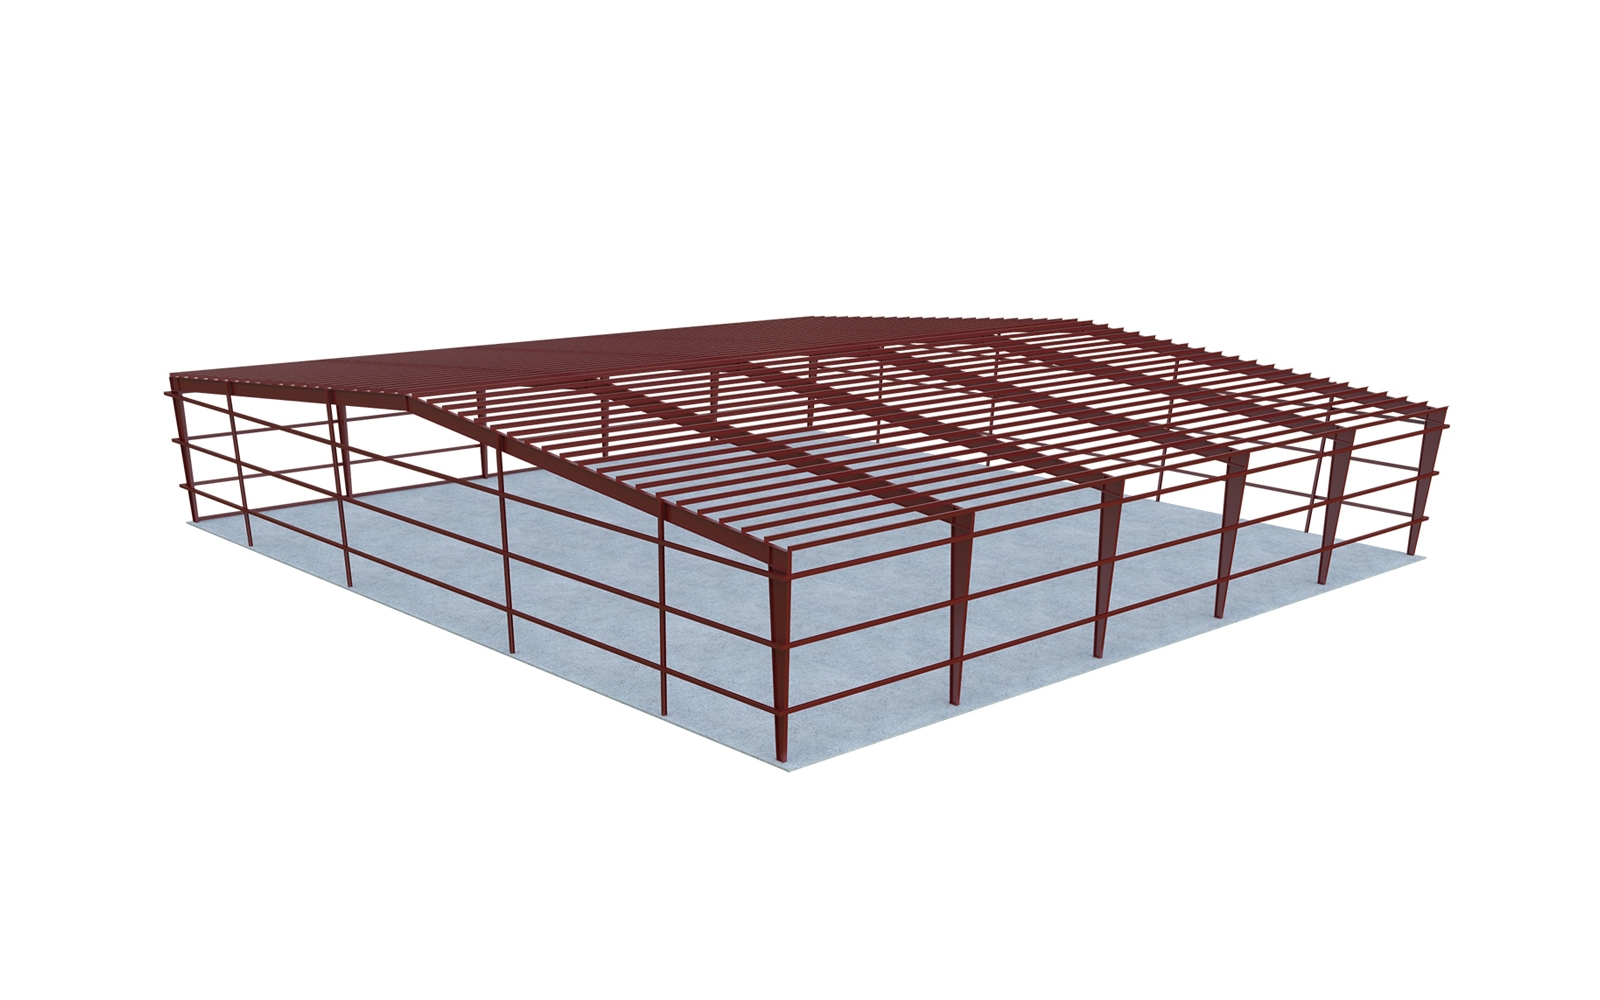 40x100 Metal Building Packages: Quick Prices | General Steel